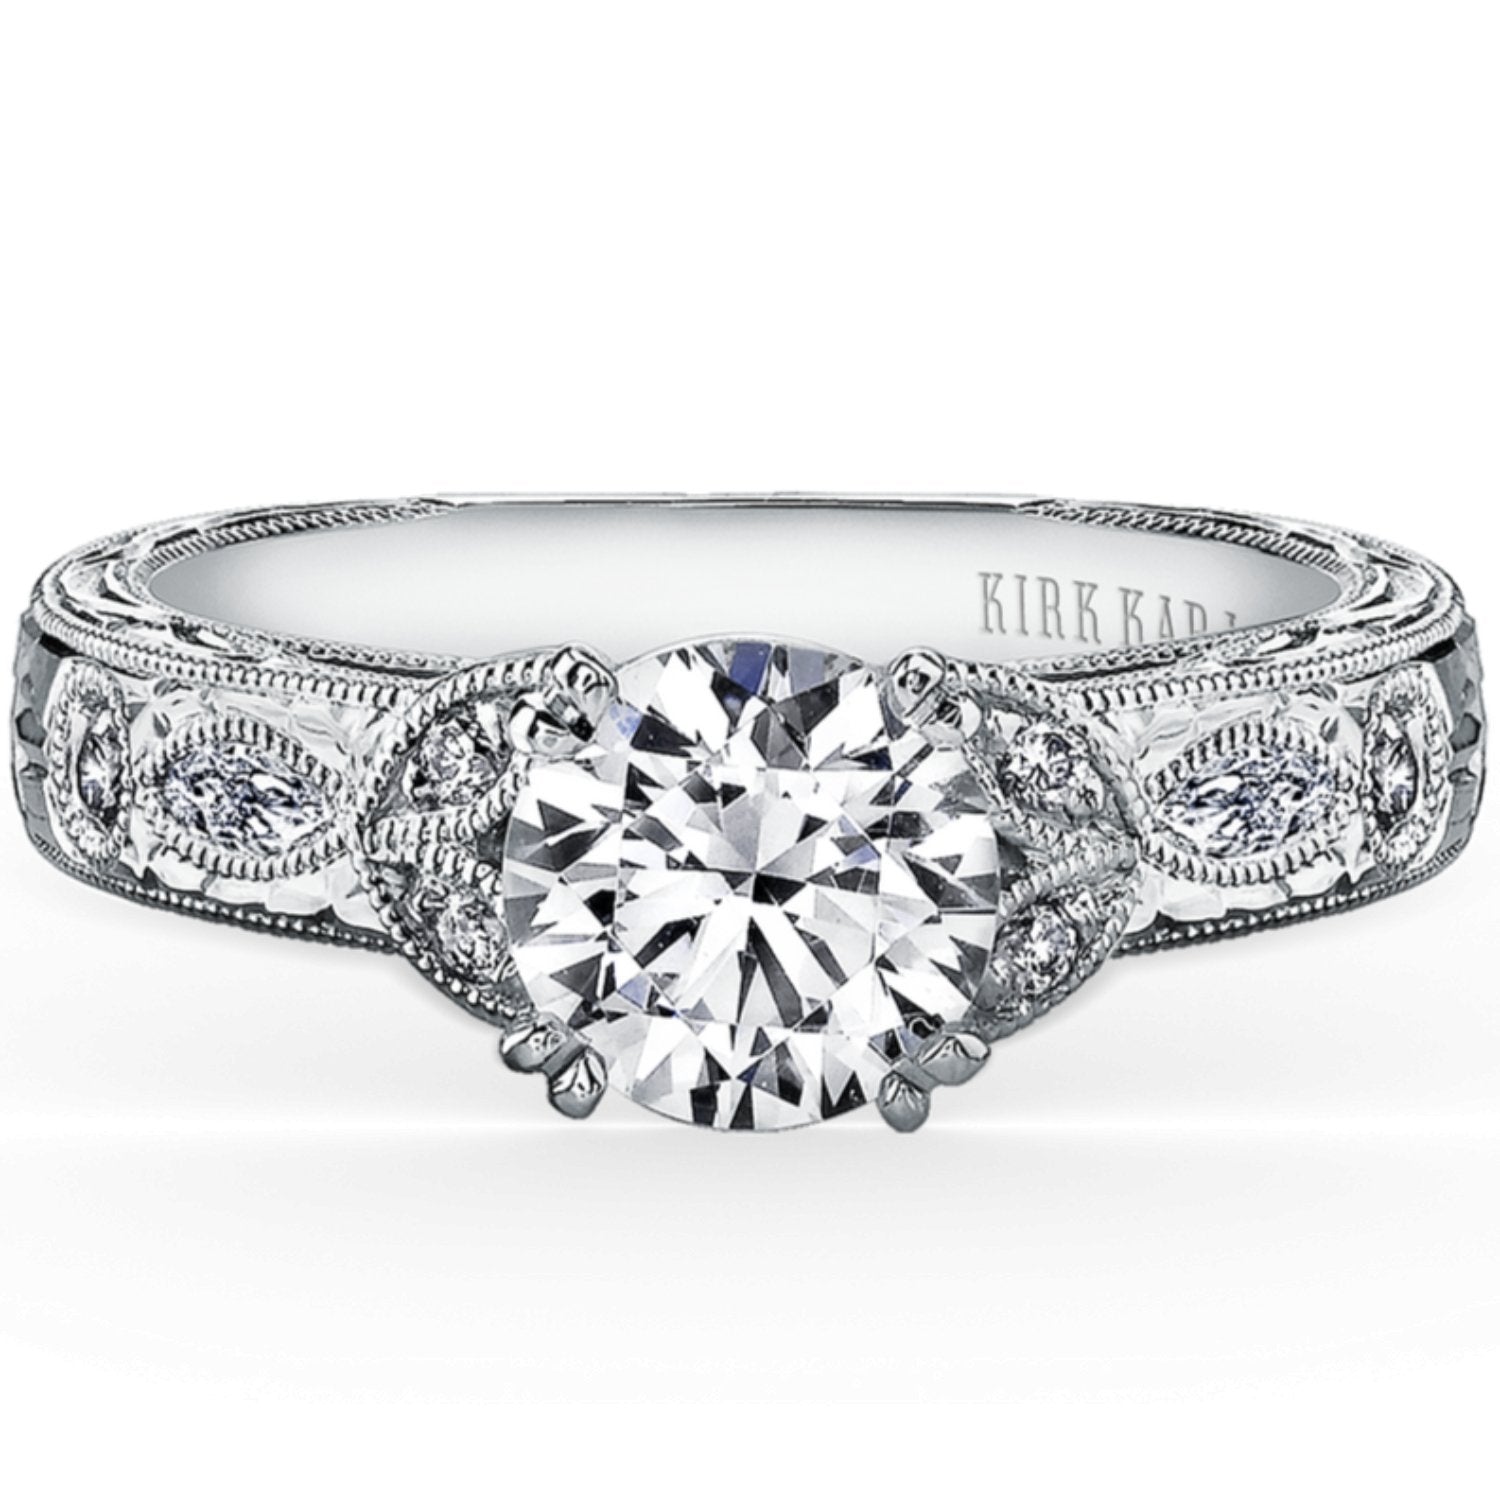 Should I Solder My Engagement Ring to My Wedding Band? – Fox Fine Jewelry